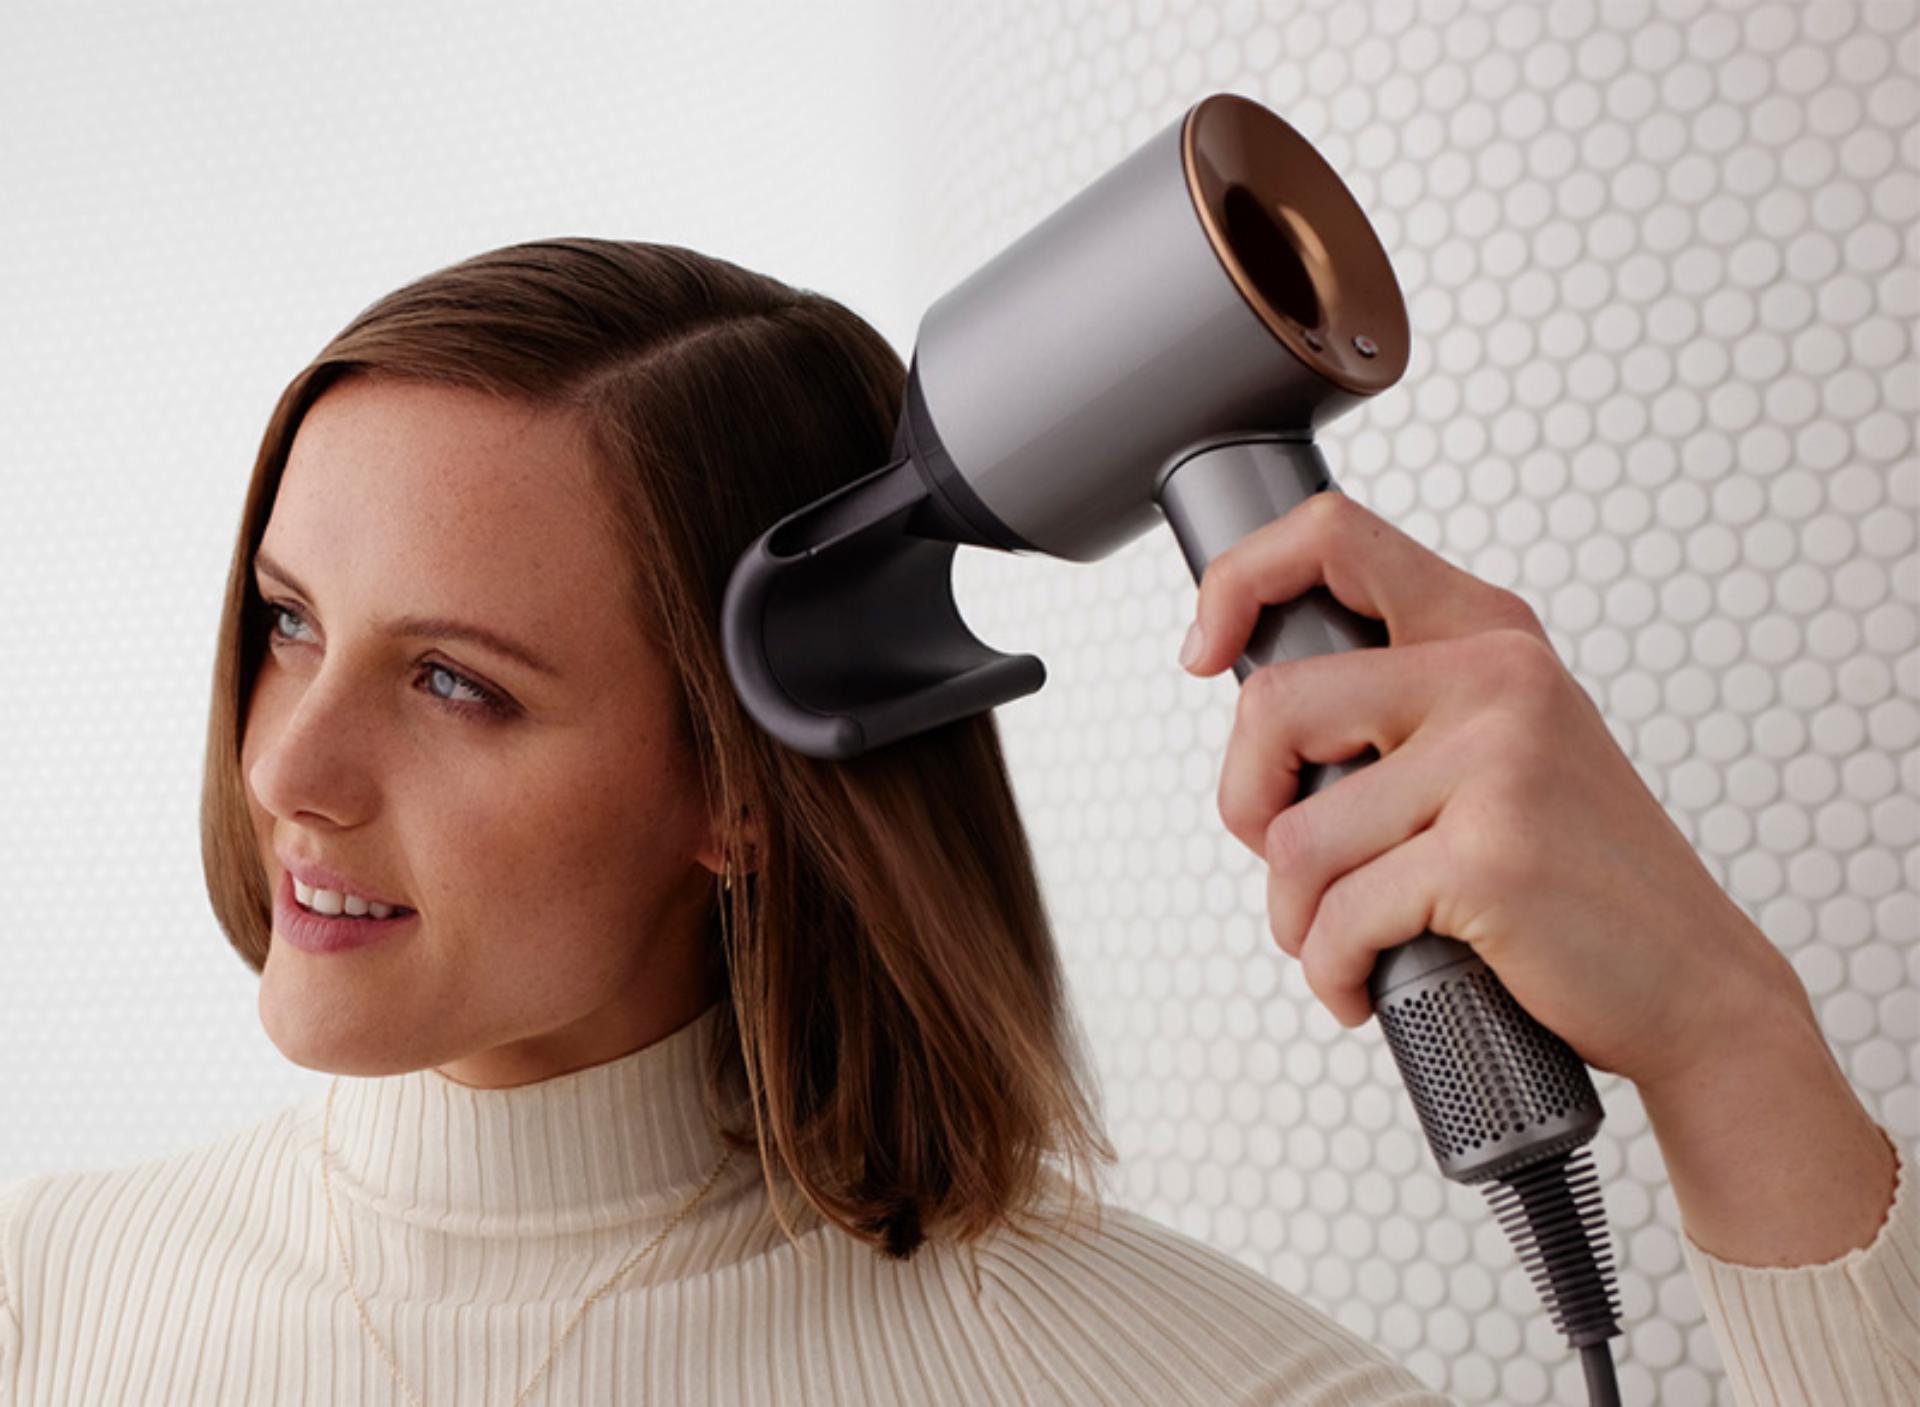 How To Use A Hair Dryer?